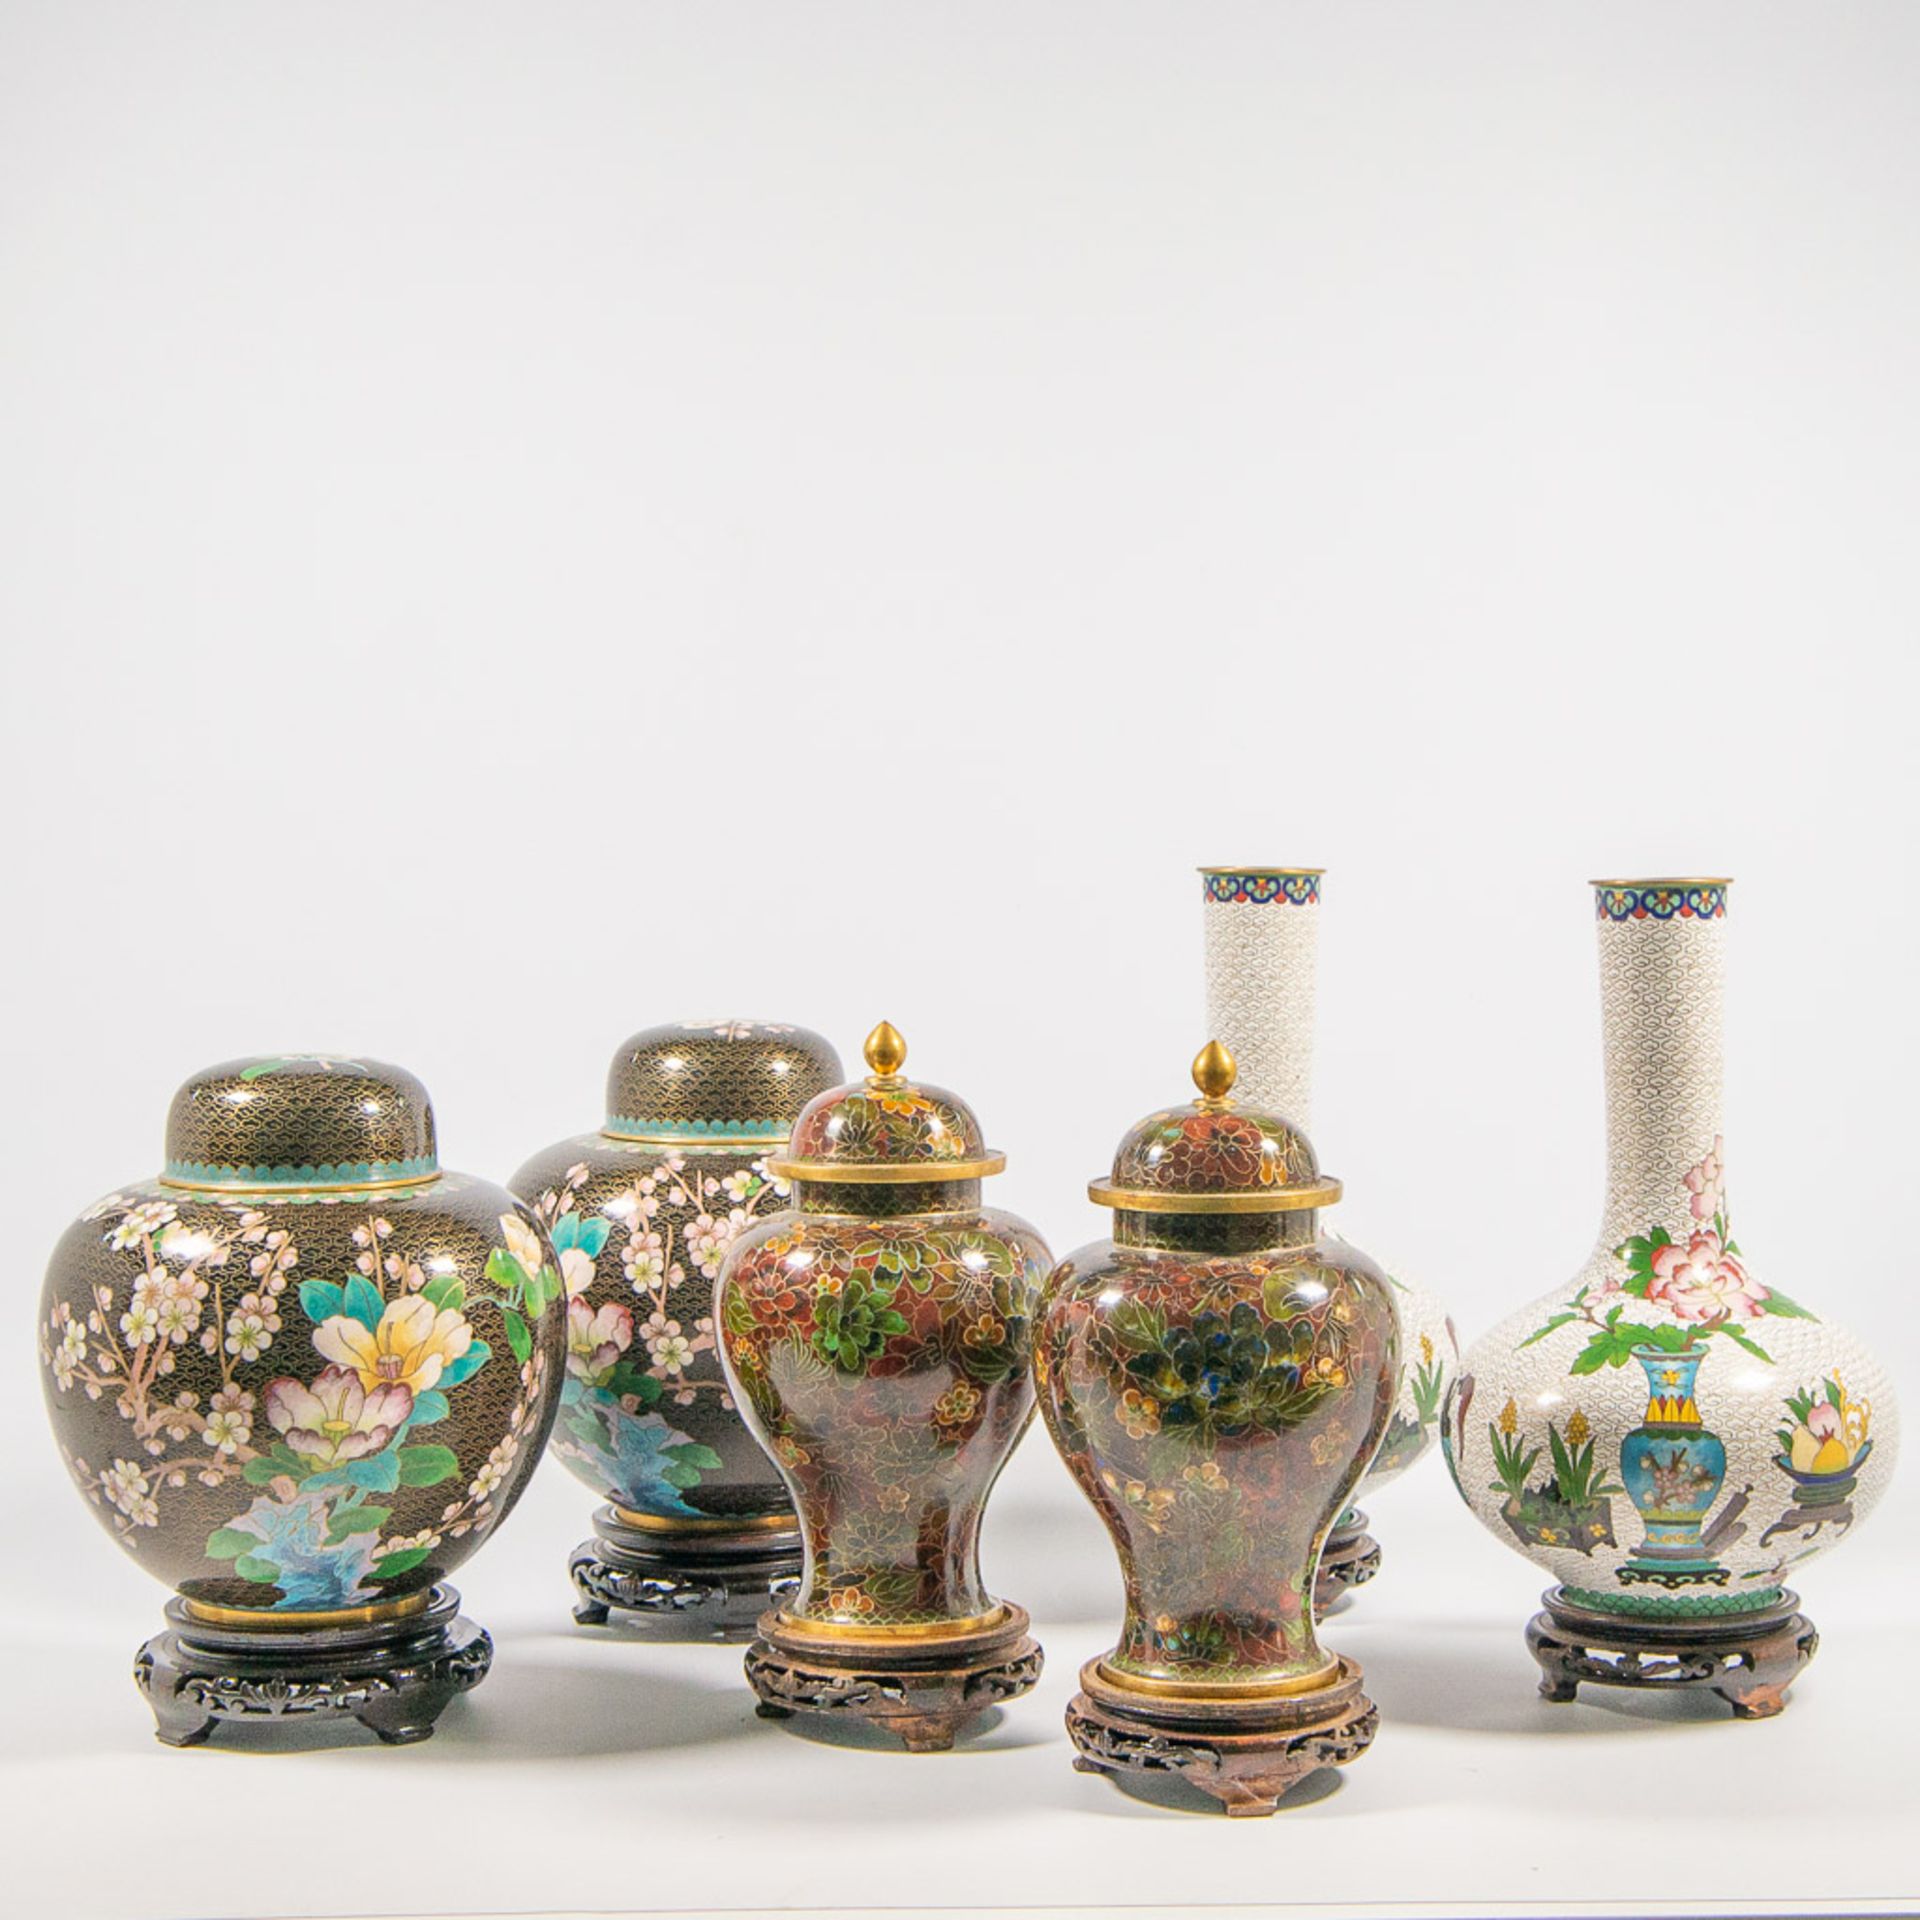 Collection of CloisonnÈ vases